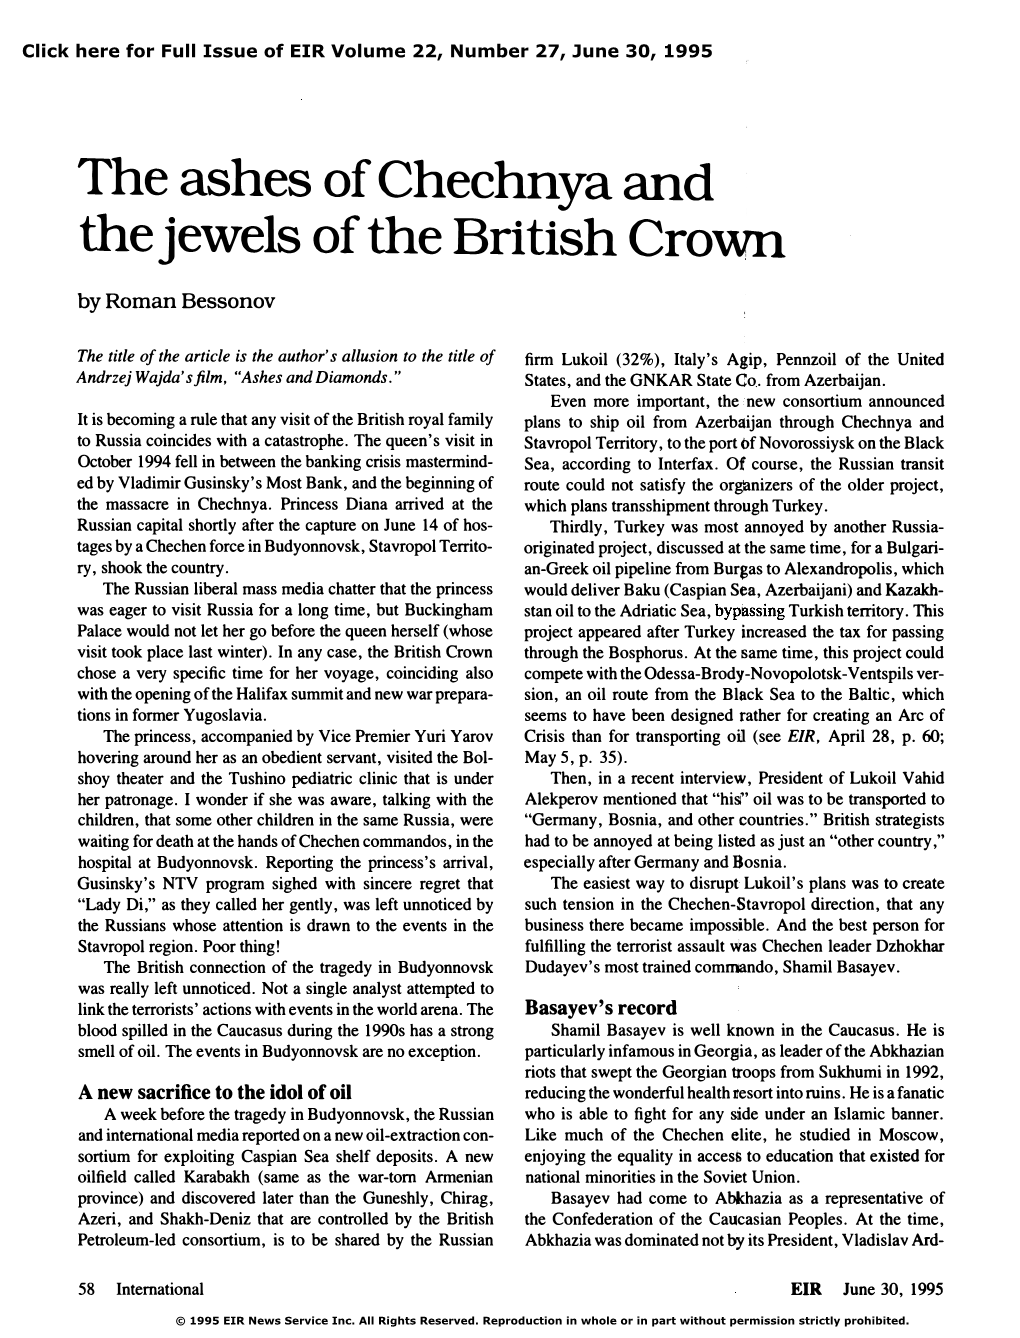 The Ashes of Chechnya and the Jewels of the British Crown